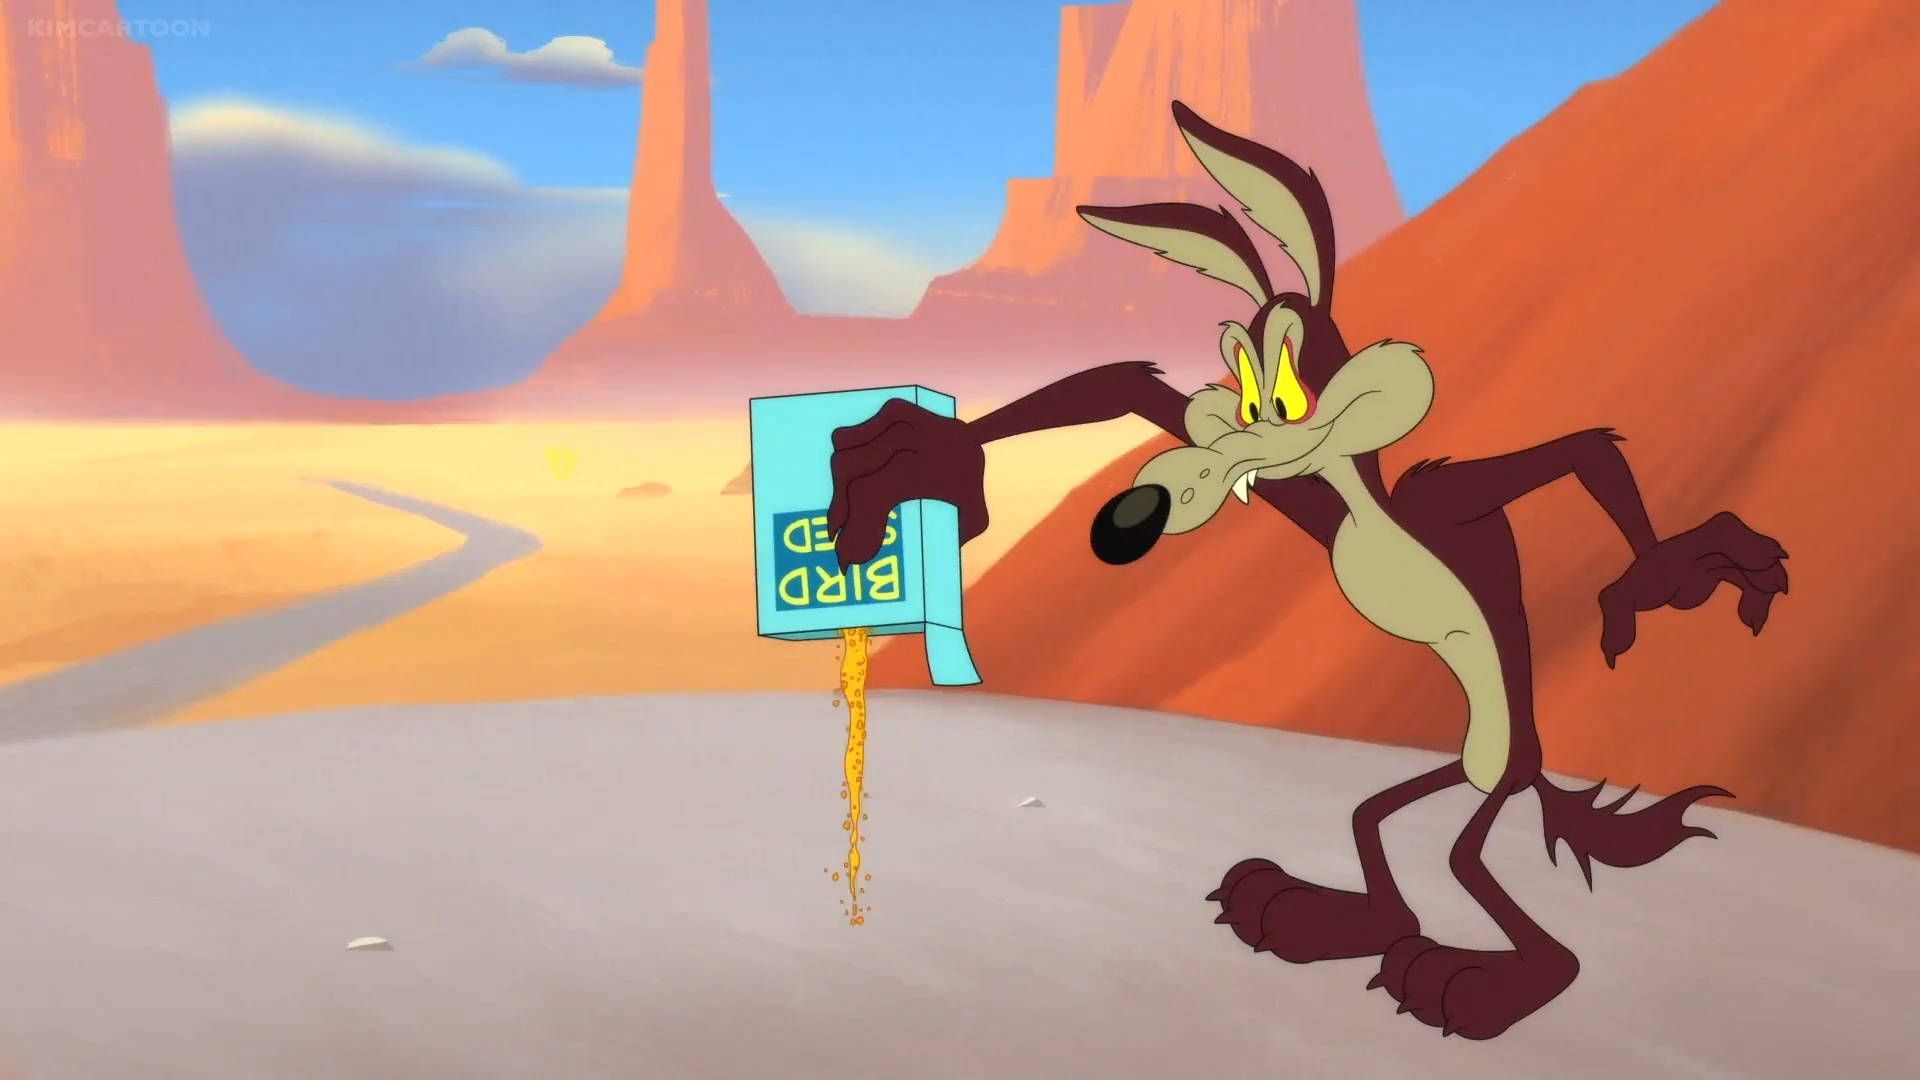 Wile E Coyote With Bird Seed Box Wallpaper